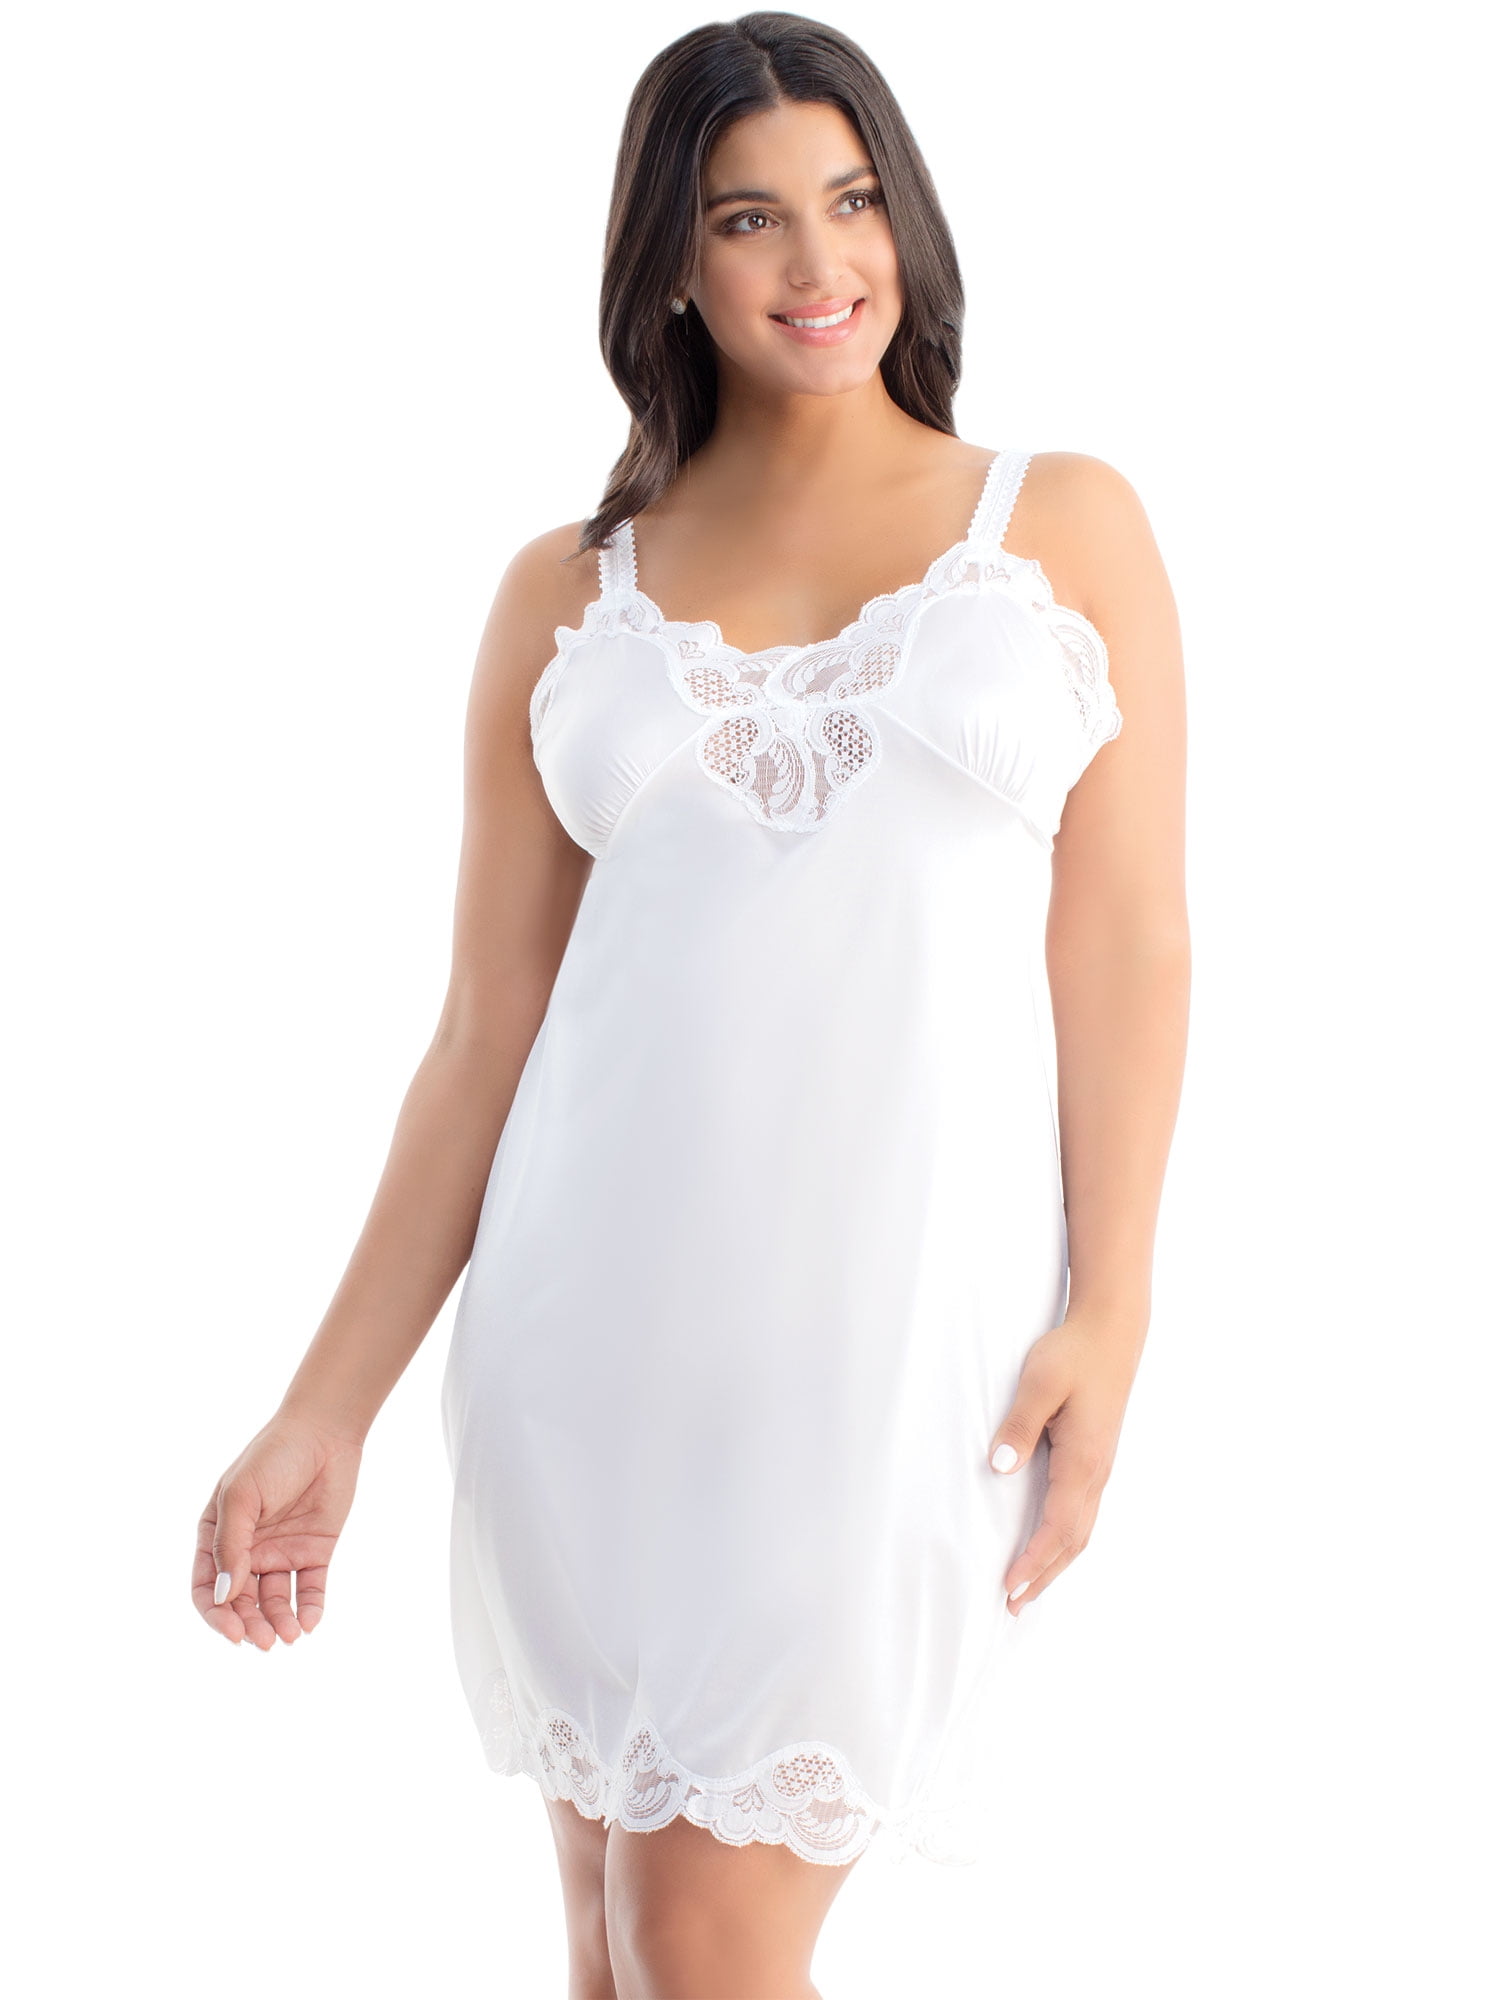 Ilusion Womens Nylon Full Slip with Lace Trim and Adjustable Straps 2012 